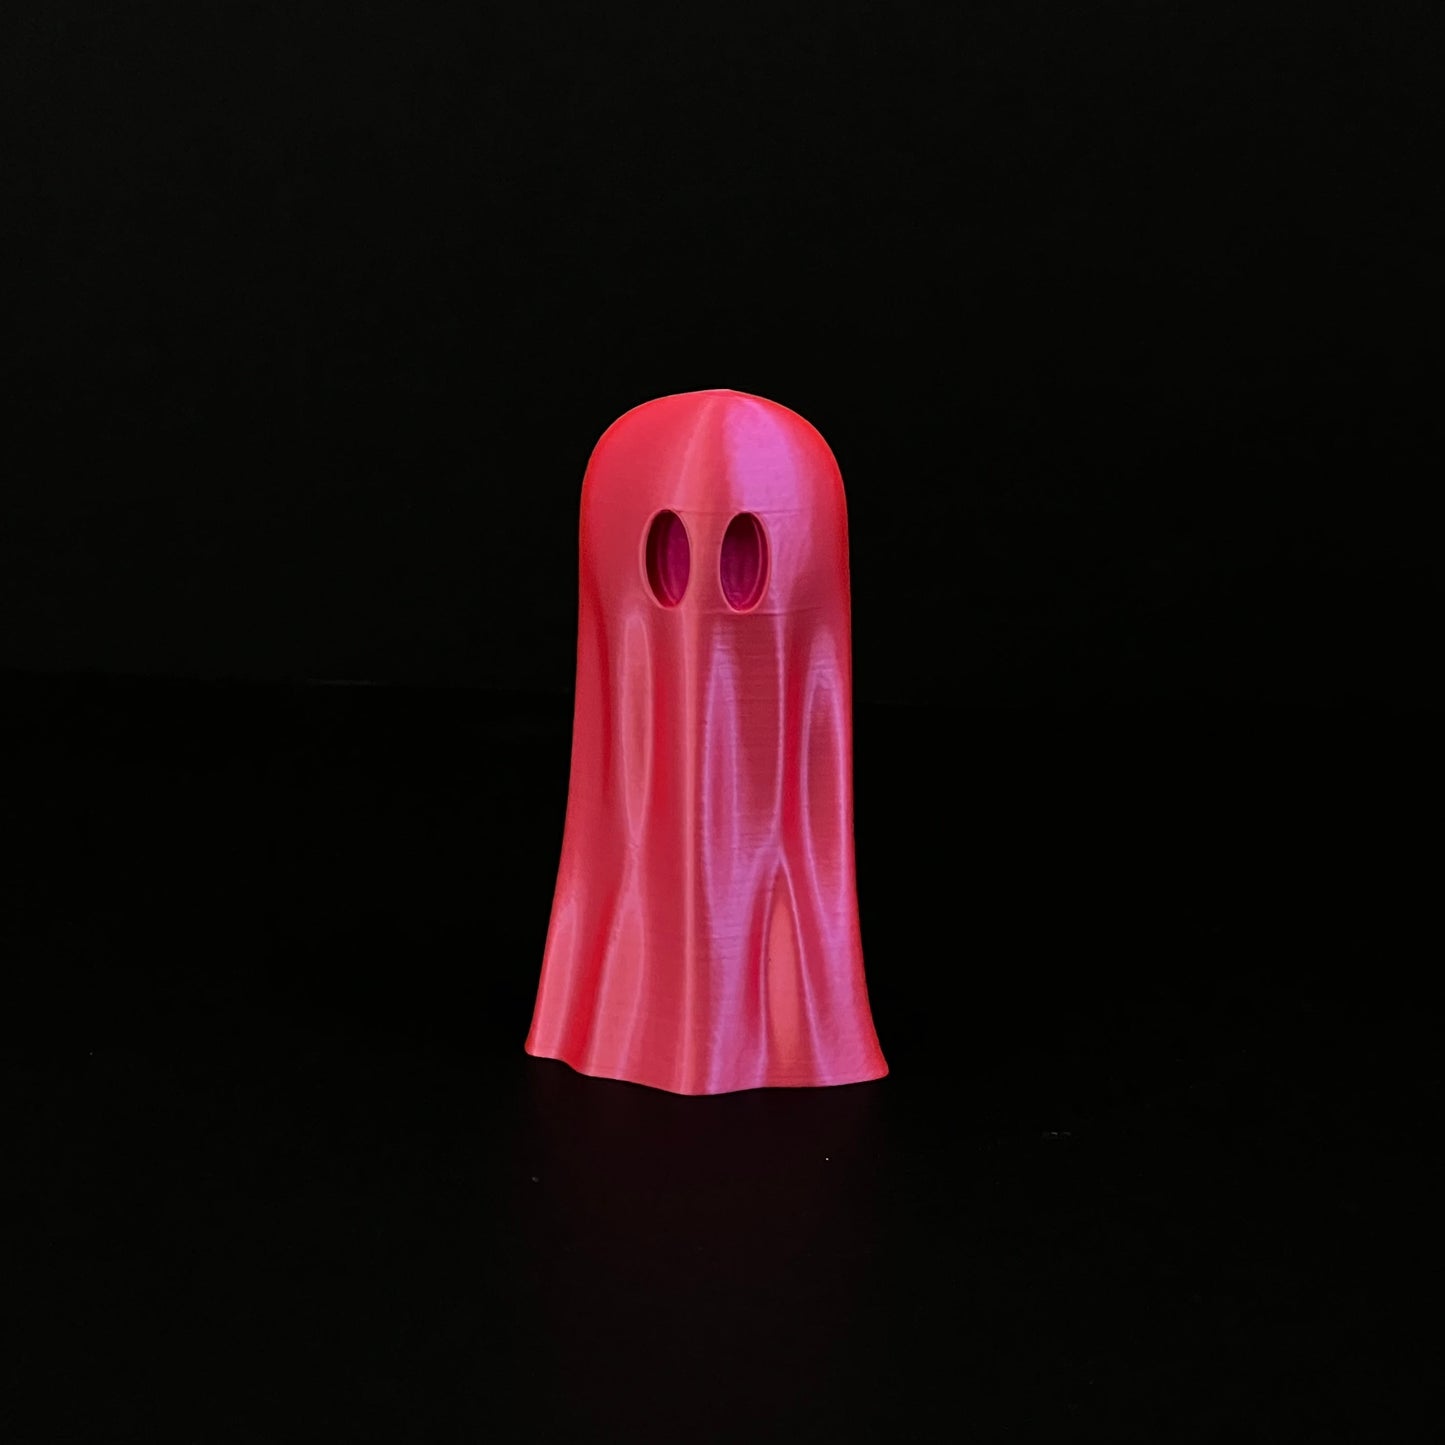 Fashionista Banshee, the perfect pink Soulmate - Ghost Figurine